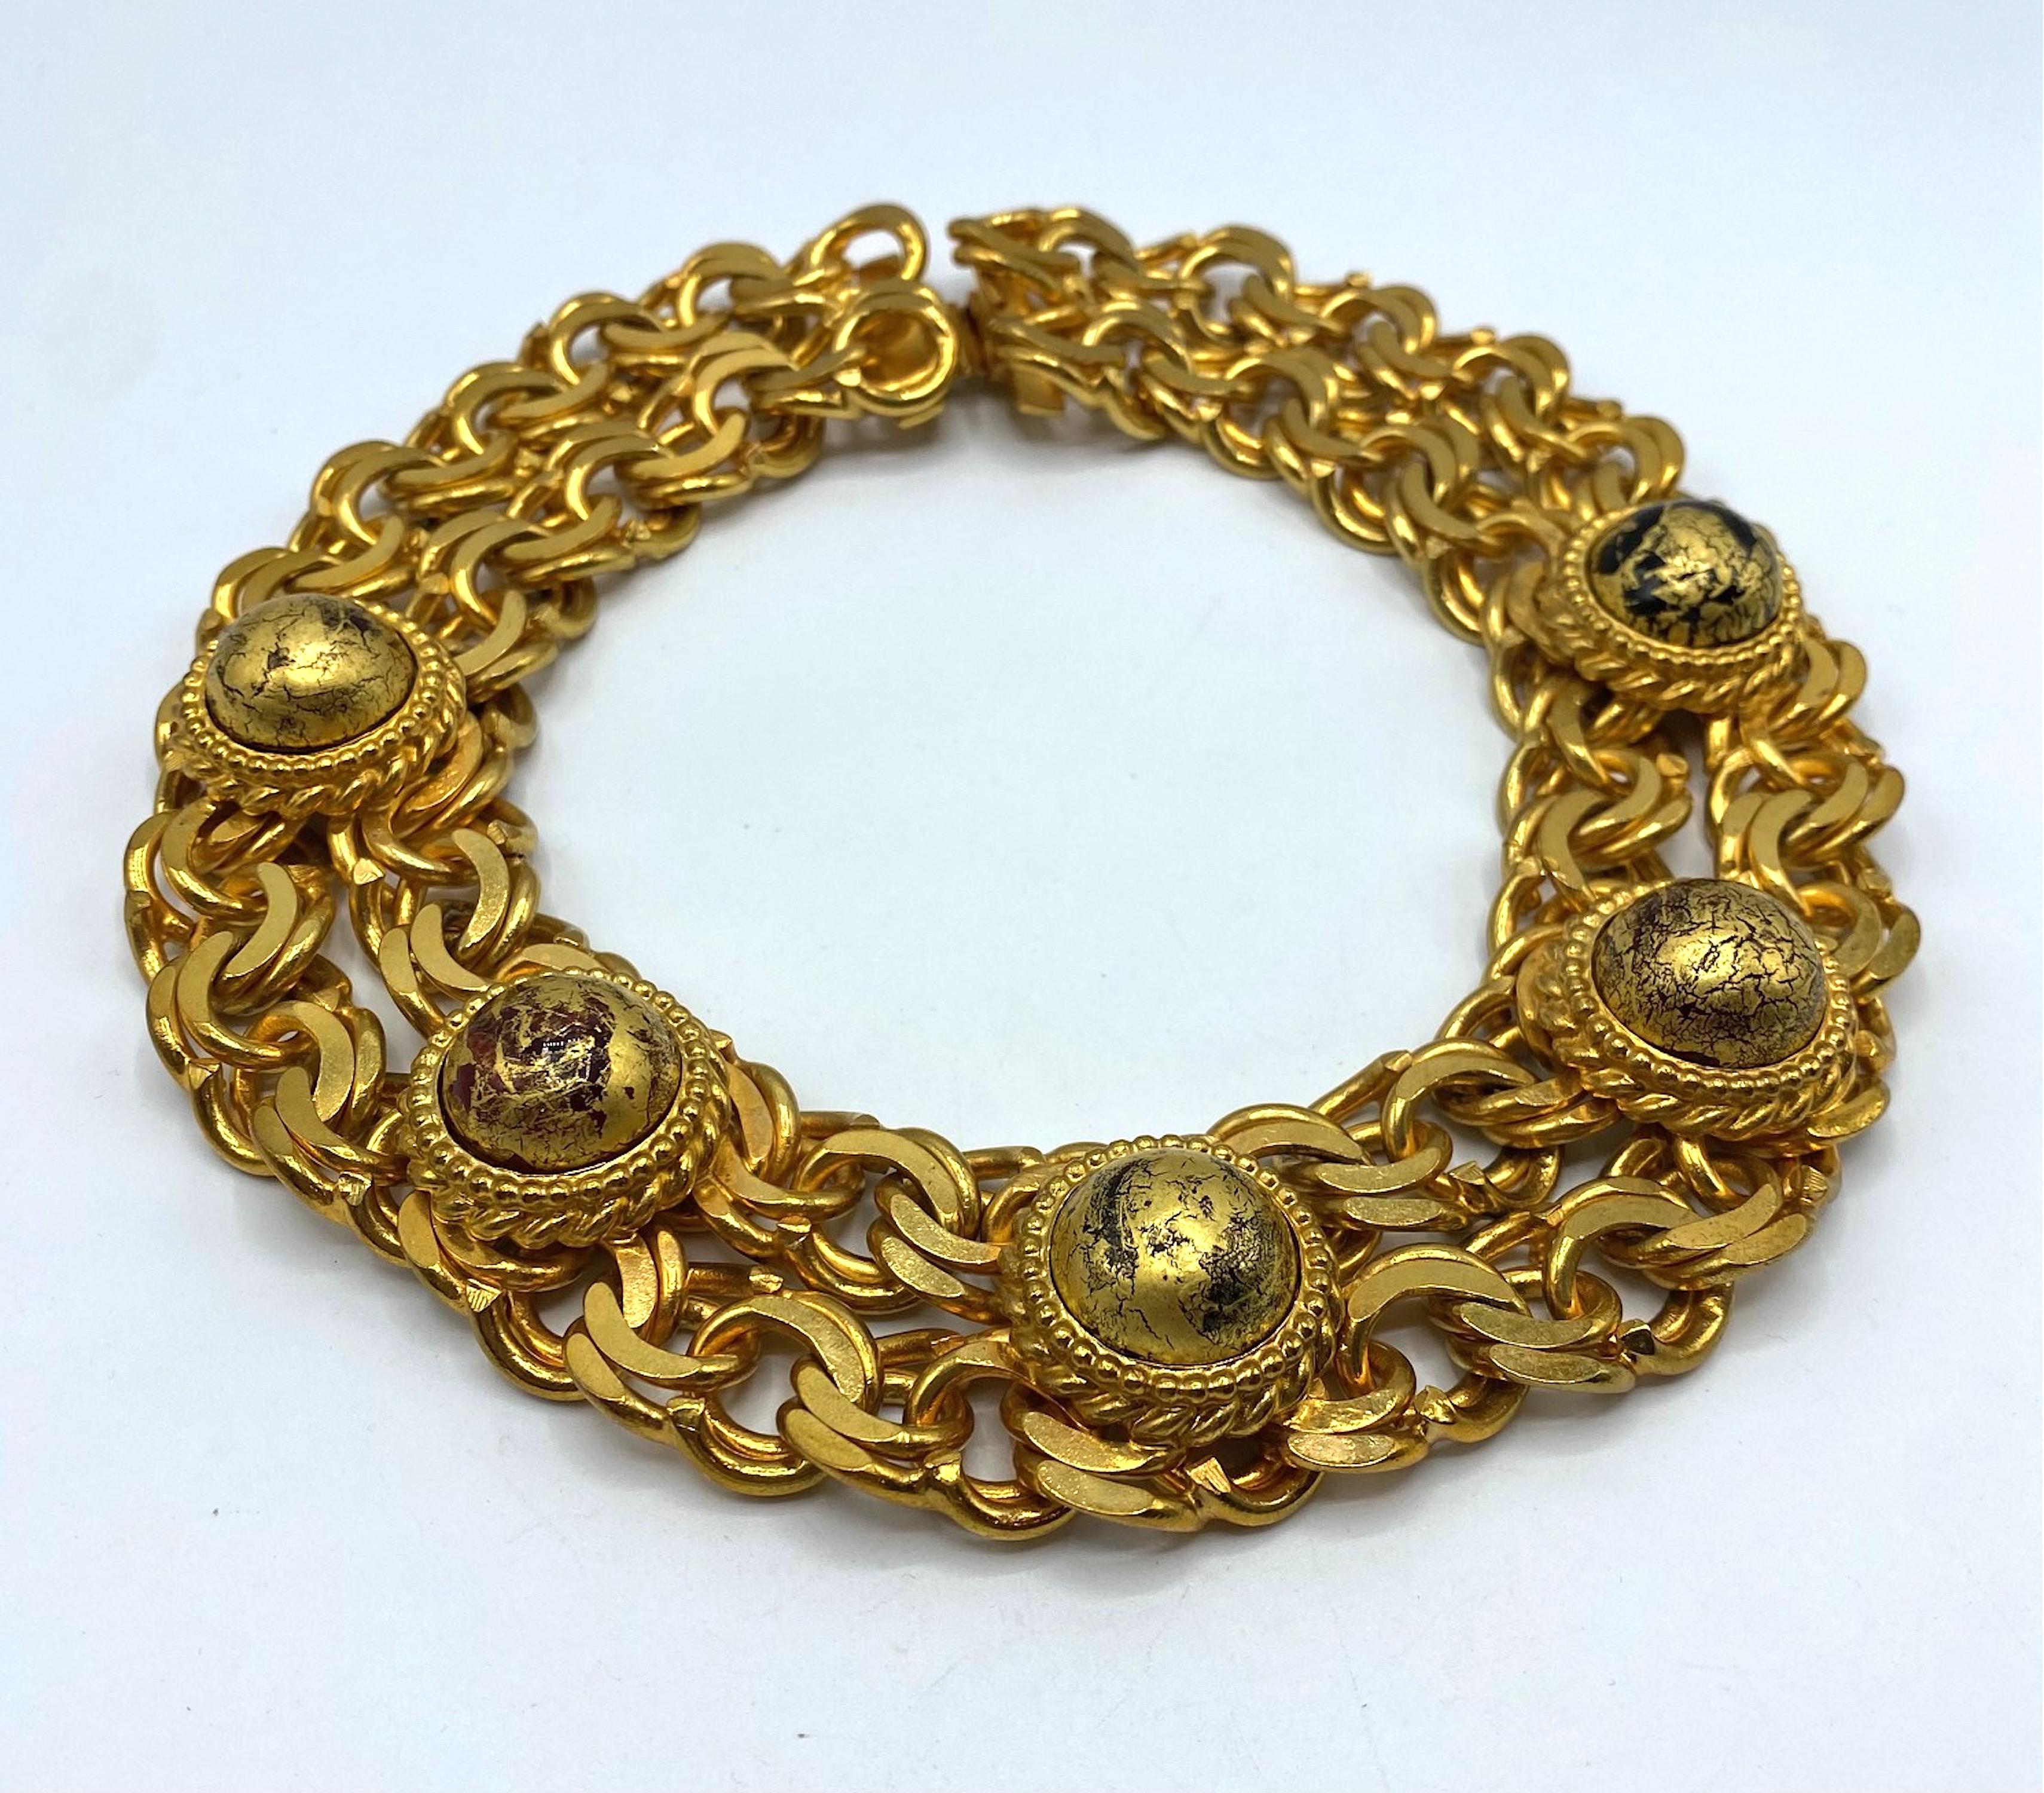 A spectacular Isabel Canovas necklace in gilt metal with art glass cabochons from the 1980s. The necklace is a wide collar style in a rich semi satin and semi shiny 18K gold plate. There are two strands of double curb link chains soldered together